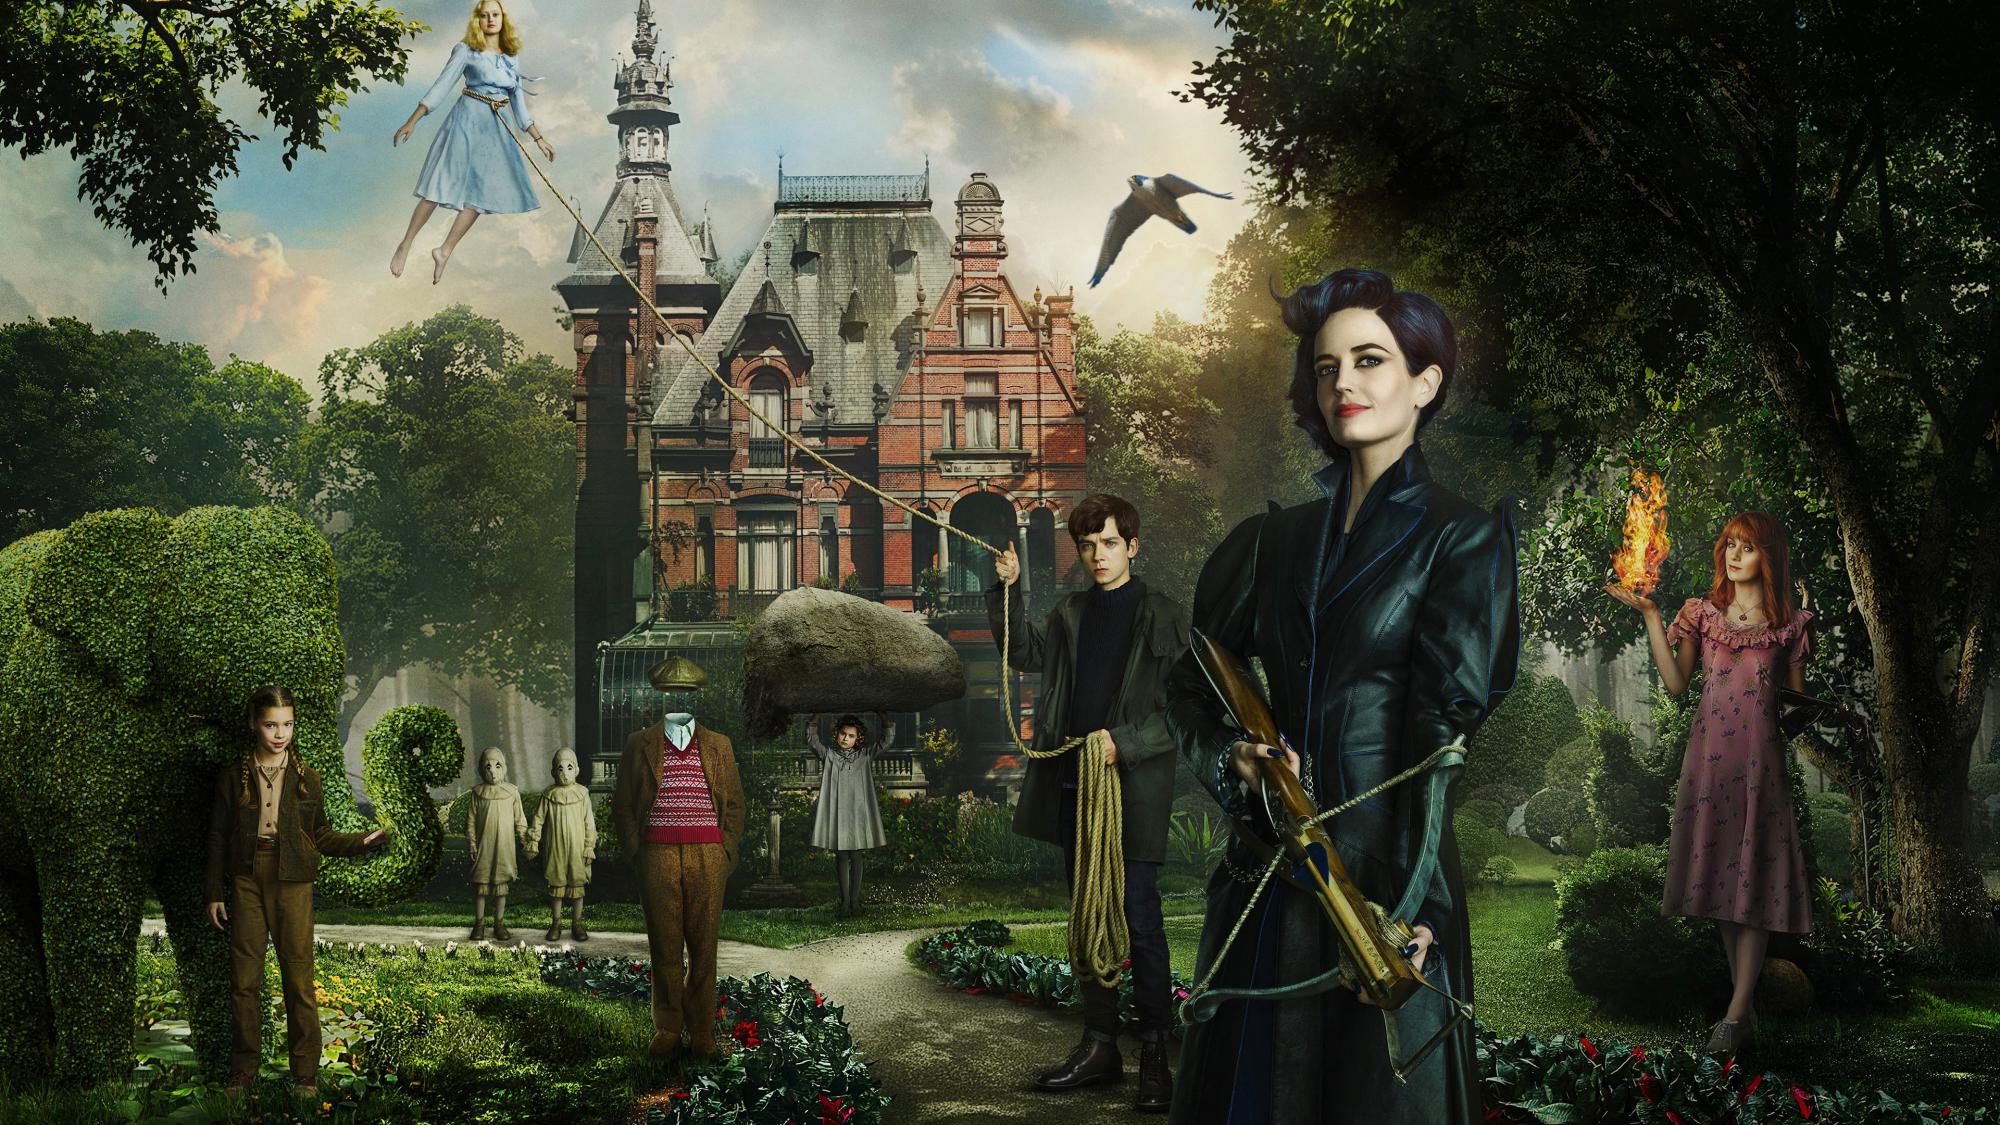 Backdrop Image for Miss Peregrine's Home for Peculiar Children